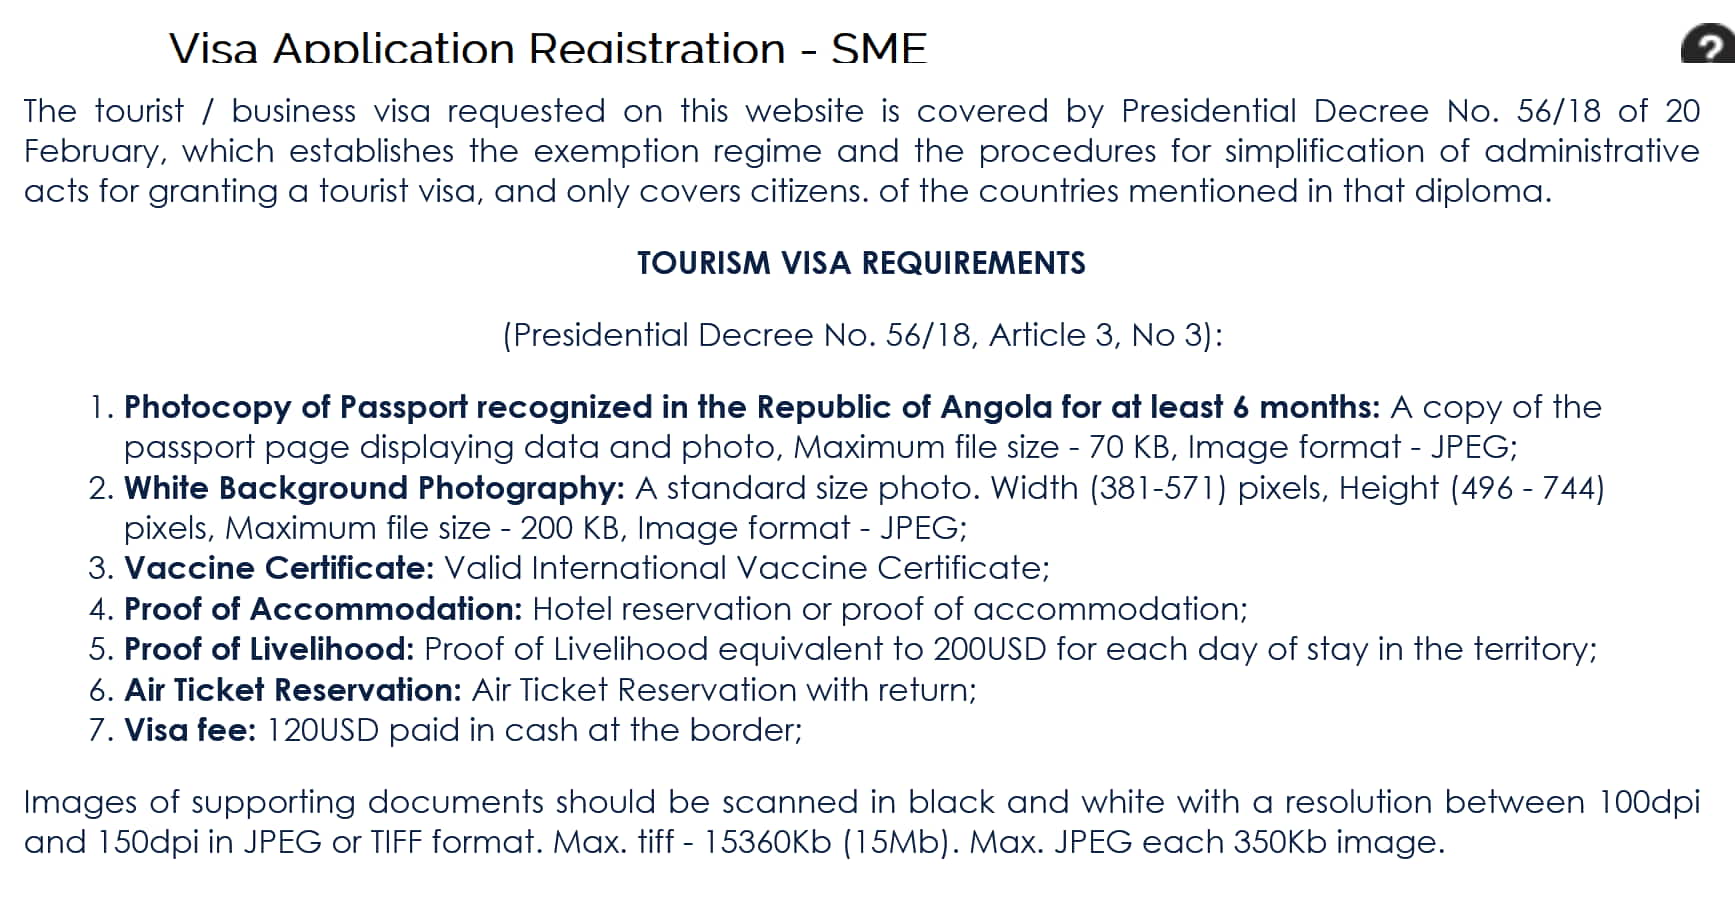 list of visa requirements for a tourist visa to Angola 